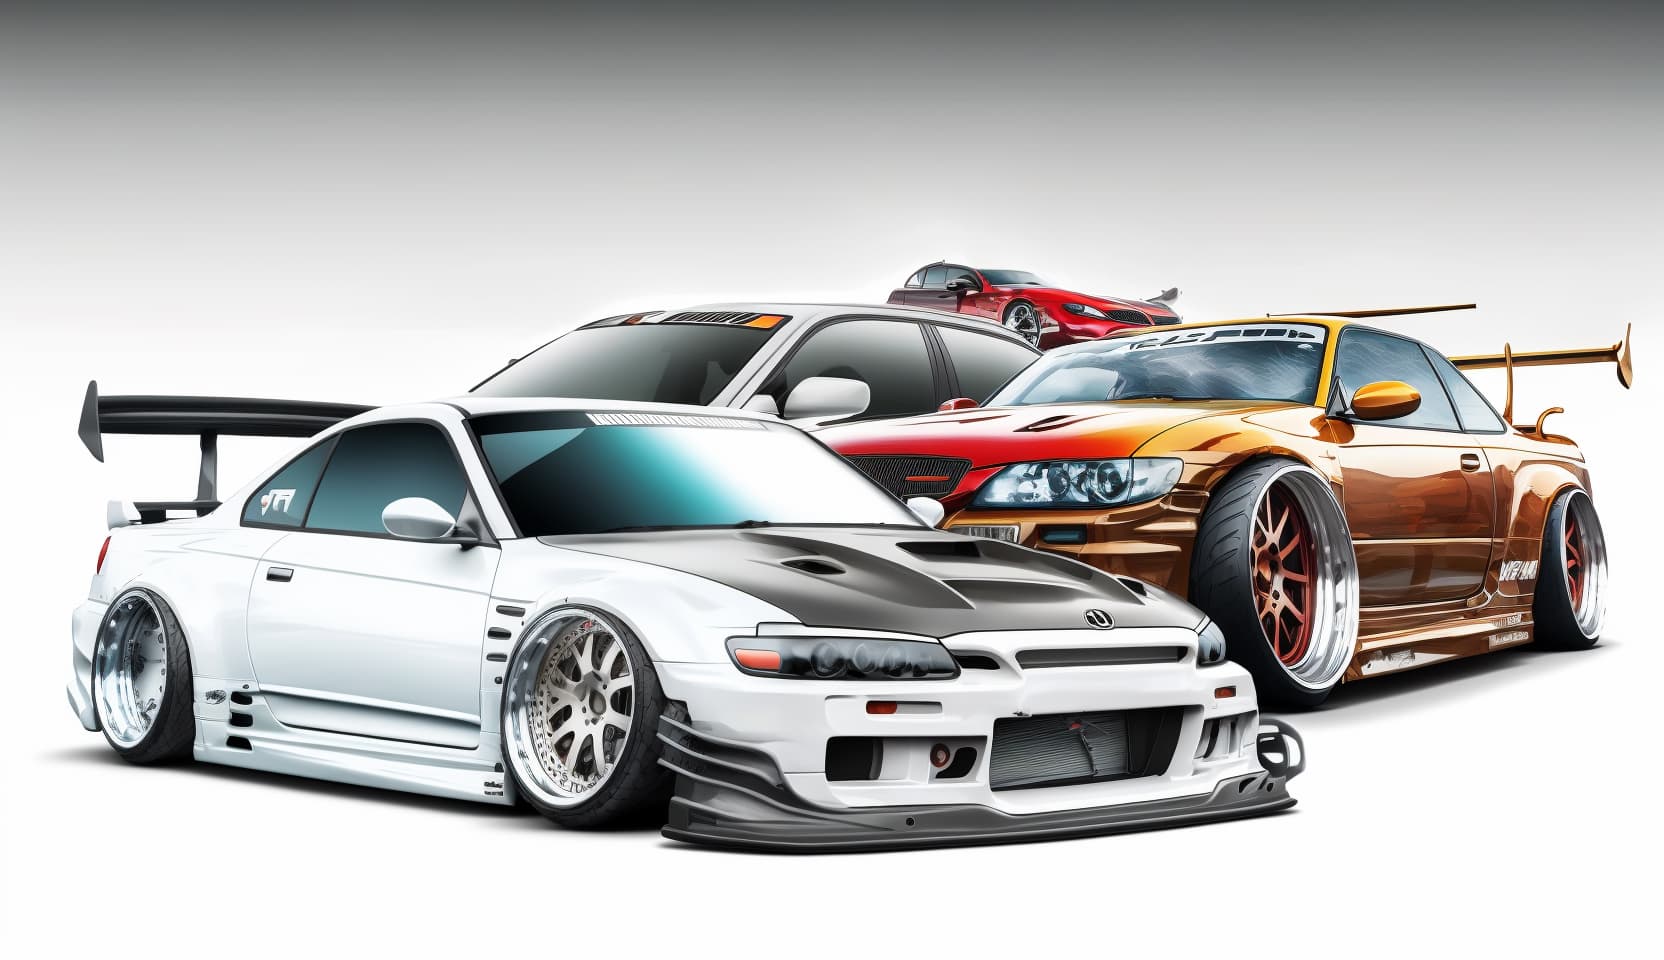 T88 34D Turbocharged Nissan S15 surrounded by 4 other JDM cc81629d 0c6b 4cf2 8f98 d71e48ea2f69 1